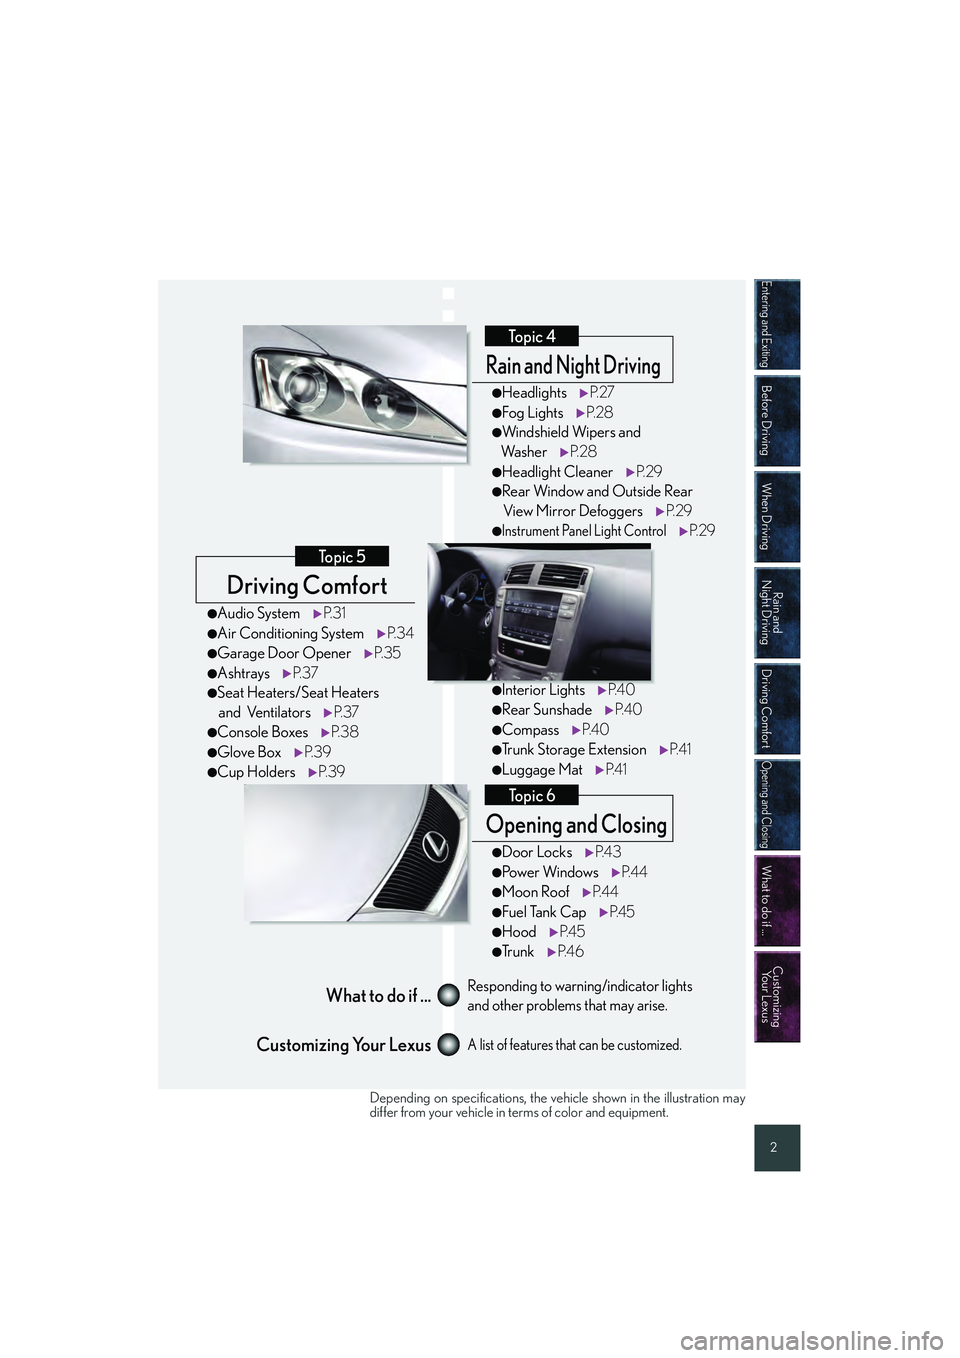 Lexus IS250 2008  Quick Guide Entering and Exiting
Before Driving
When Driving
Rain and 
Night Driving
Driving Comfort
Opening and Closing
What to do if ...
Customizing Your Lexus
2
Driving Comfort
Topic 5
Opening and Closing
Topi